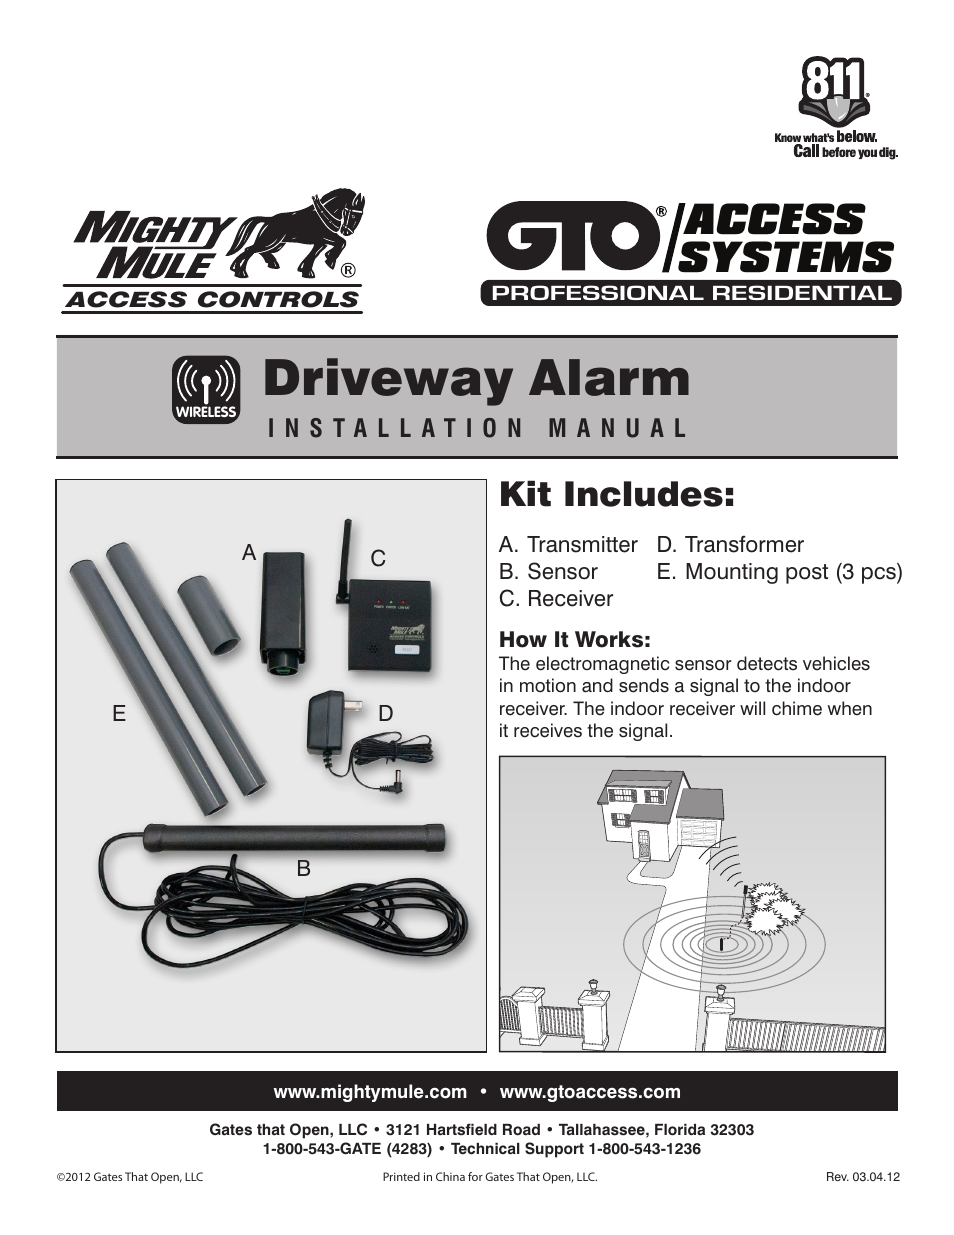 Mighty Mule FM131 User Manual | 8 pages | Also for: FM231